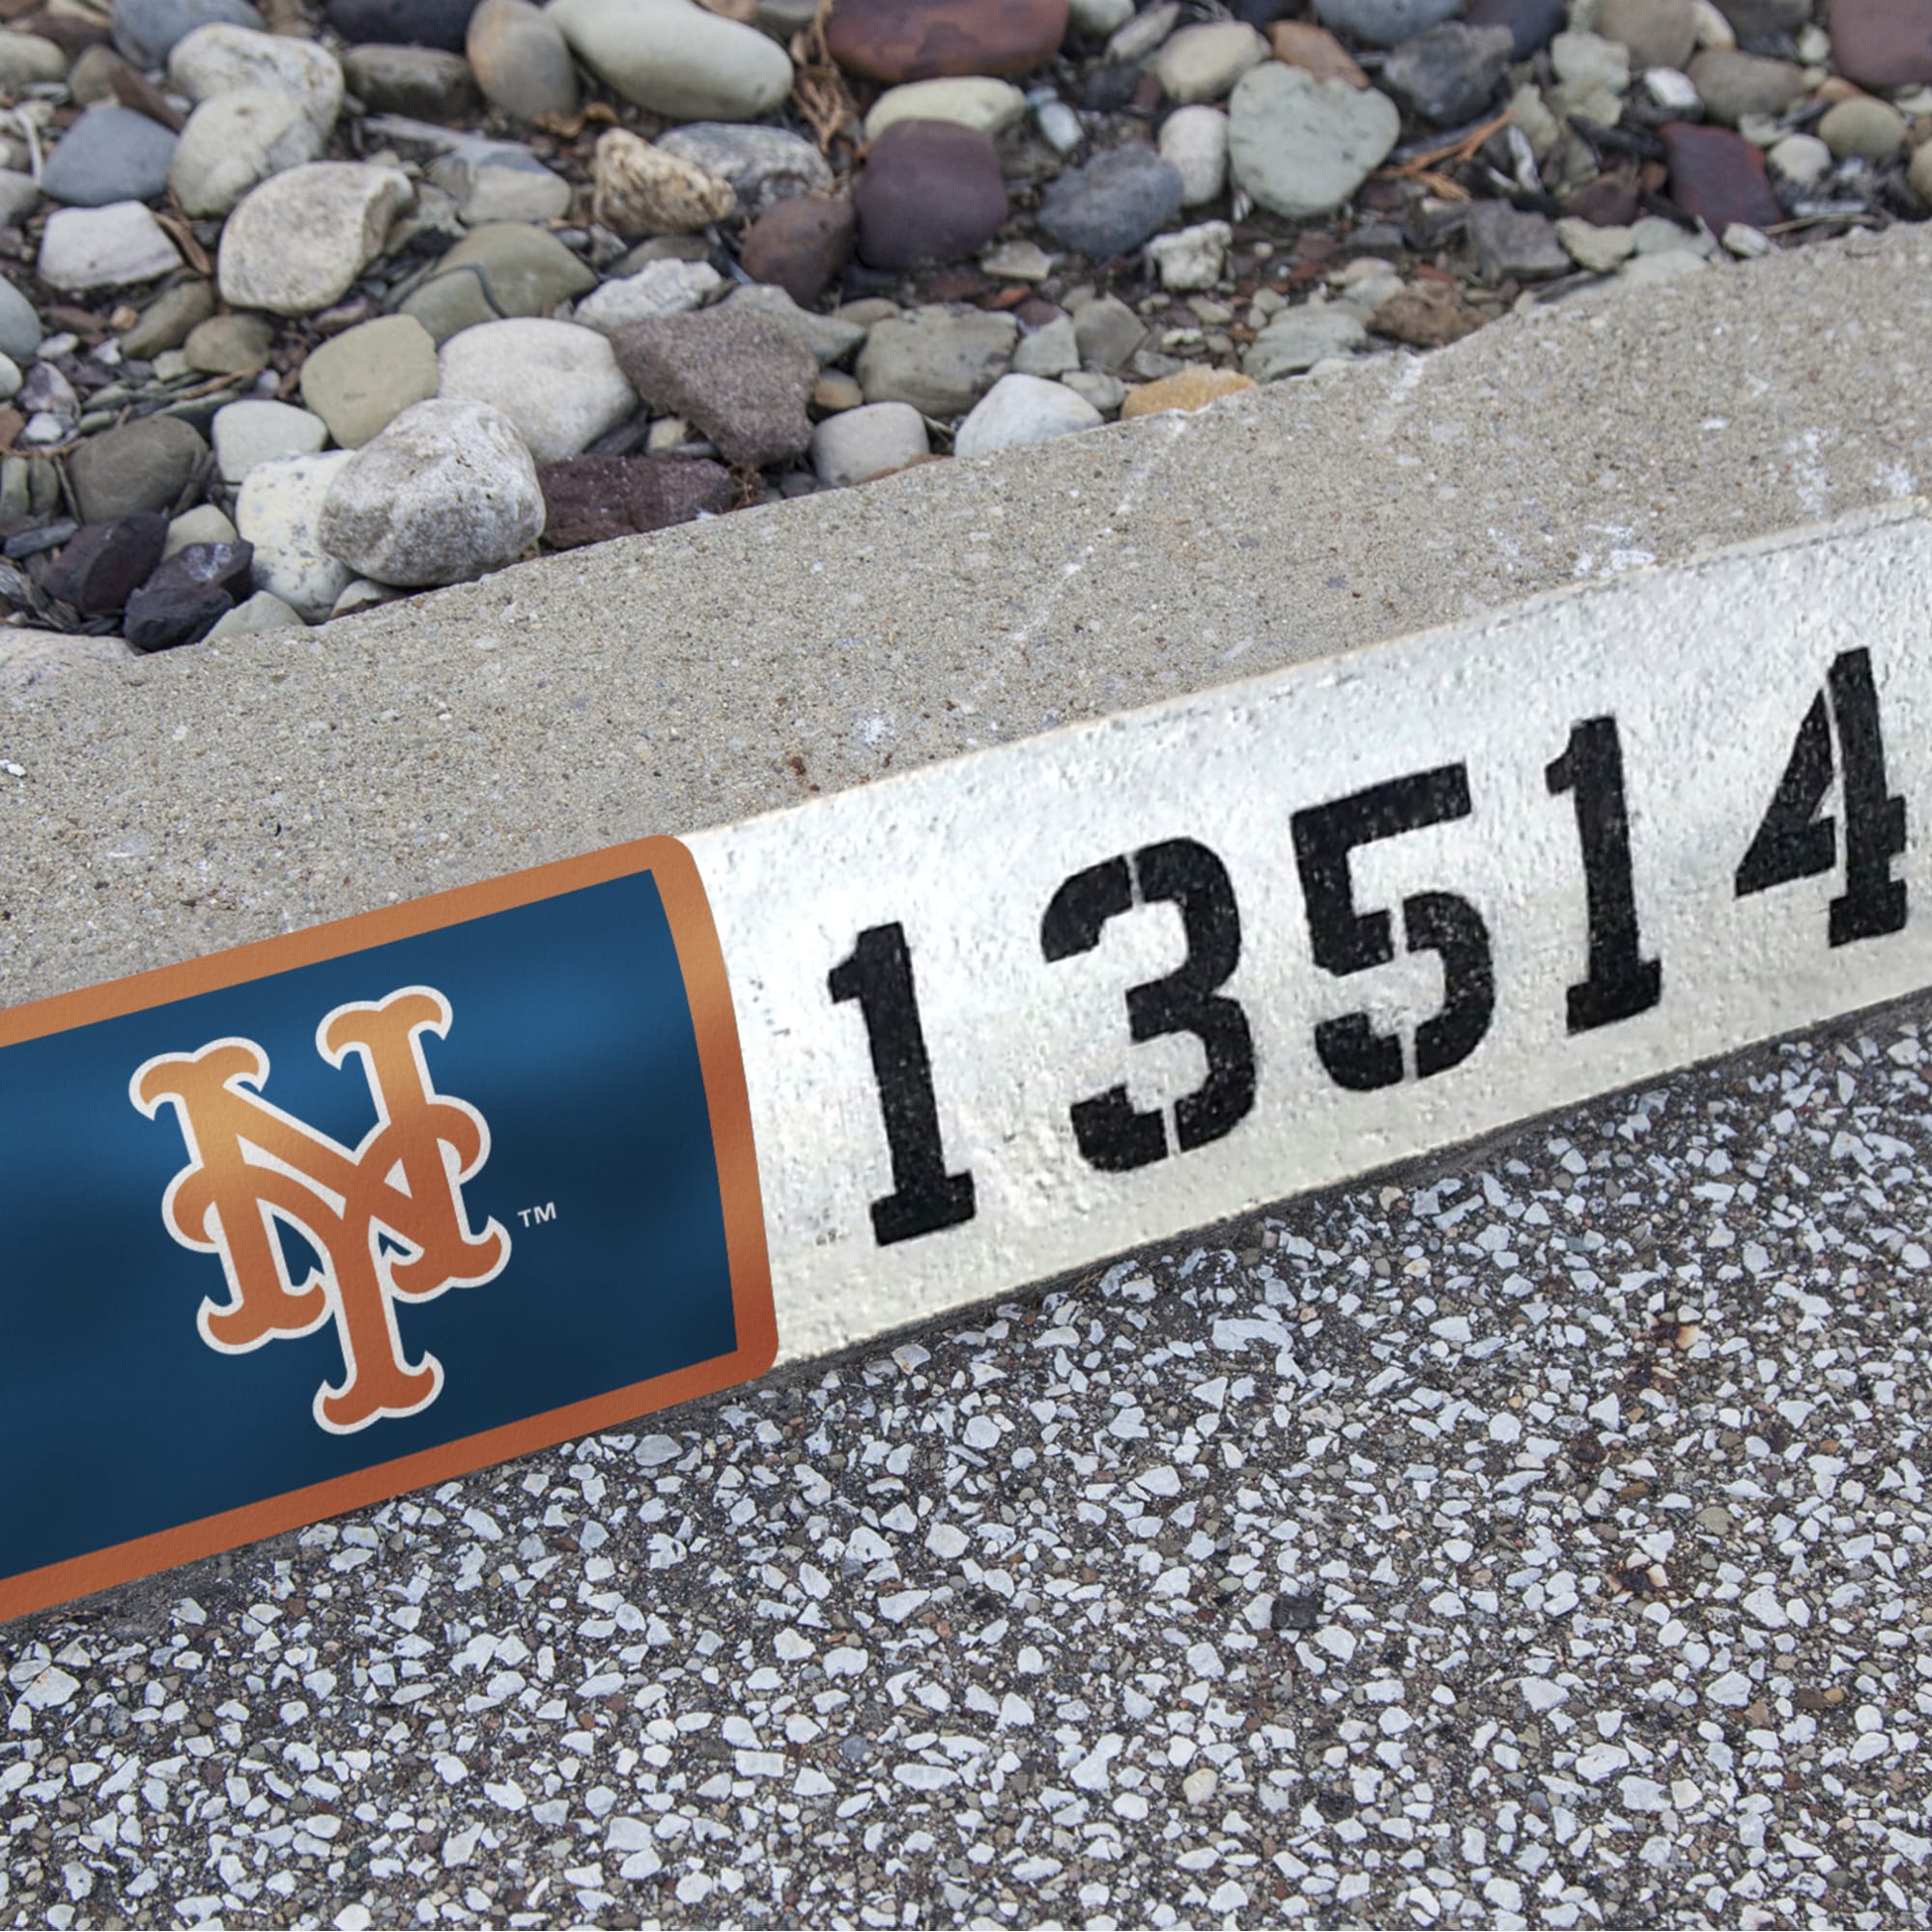 New York Mets: Address Block - Officially Licensed MLB Outdoor Graphic 6.0"W x 8.0"H by Fathead | Wood/Aluminum